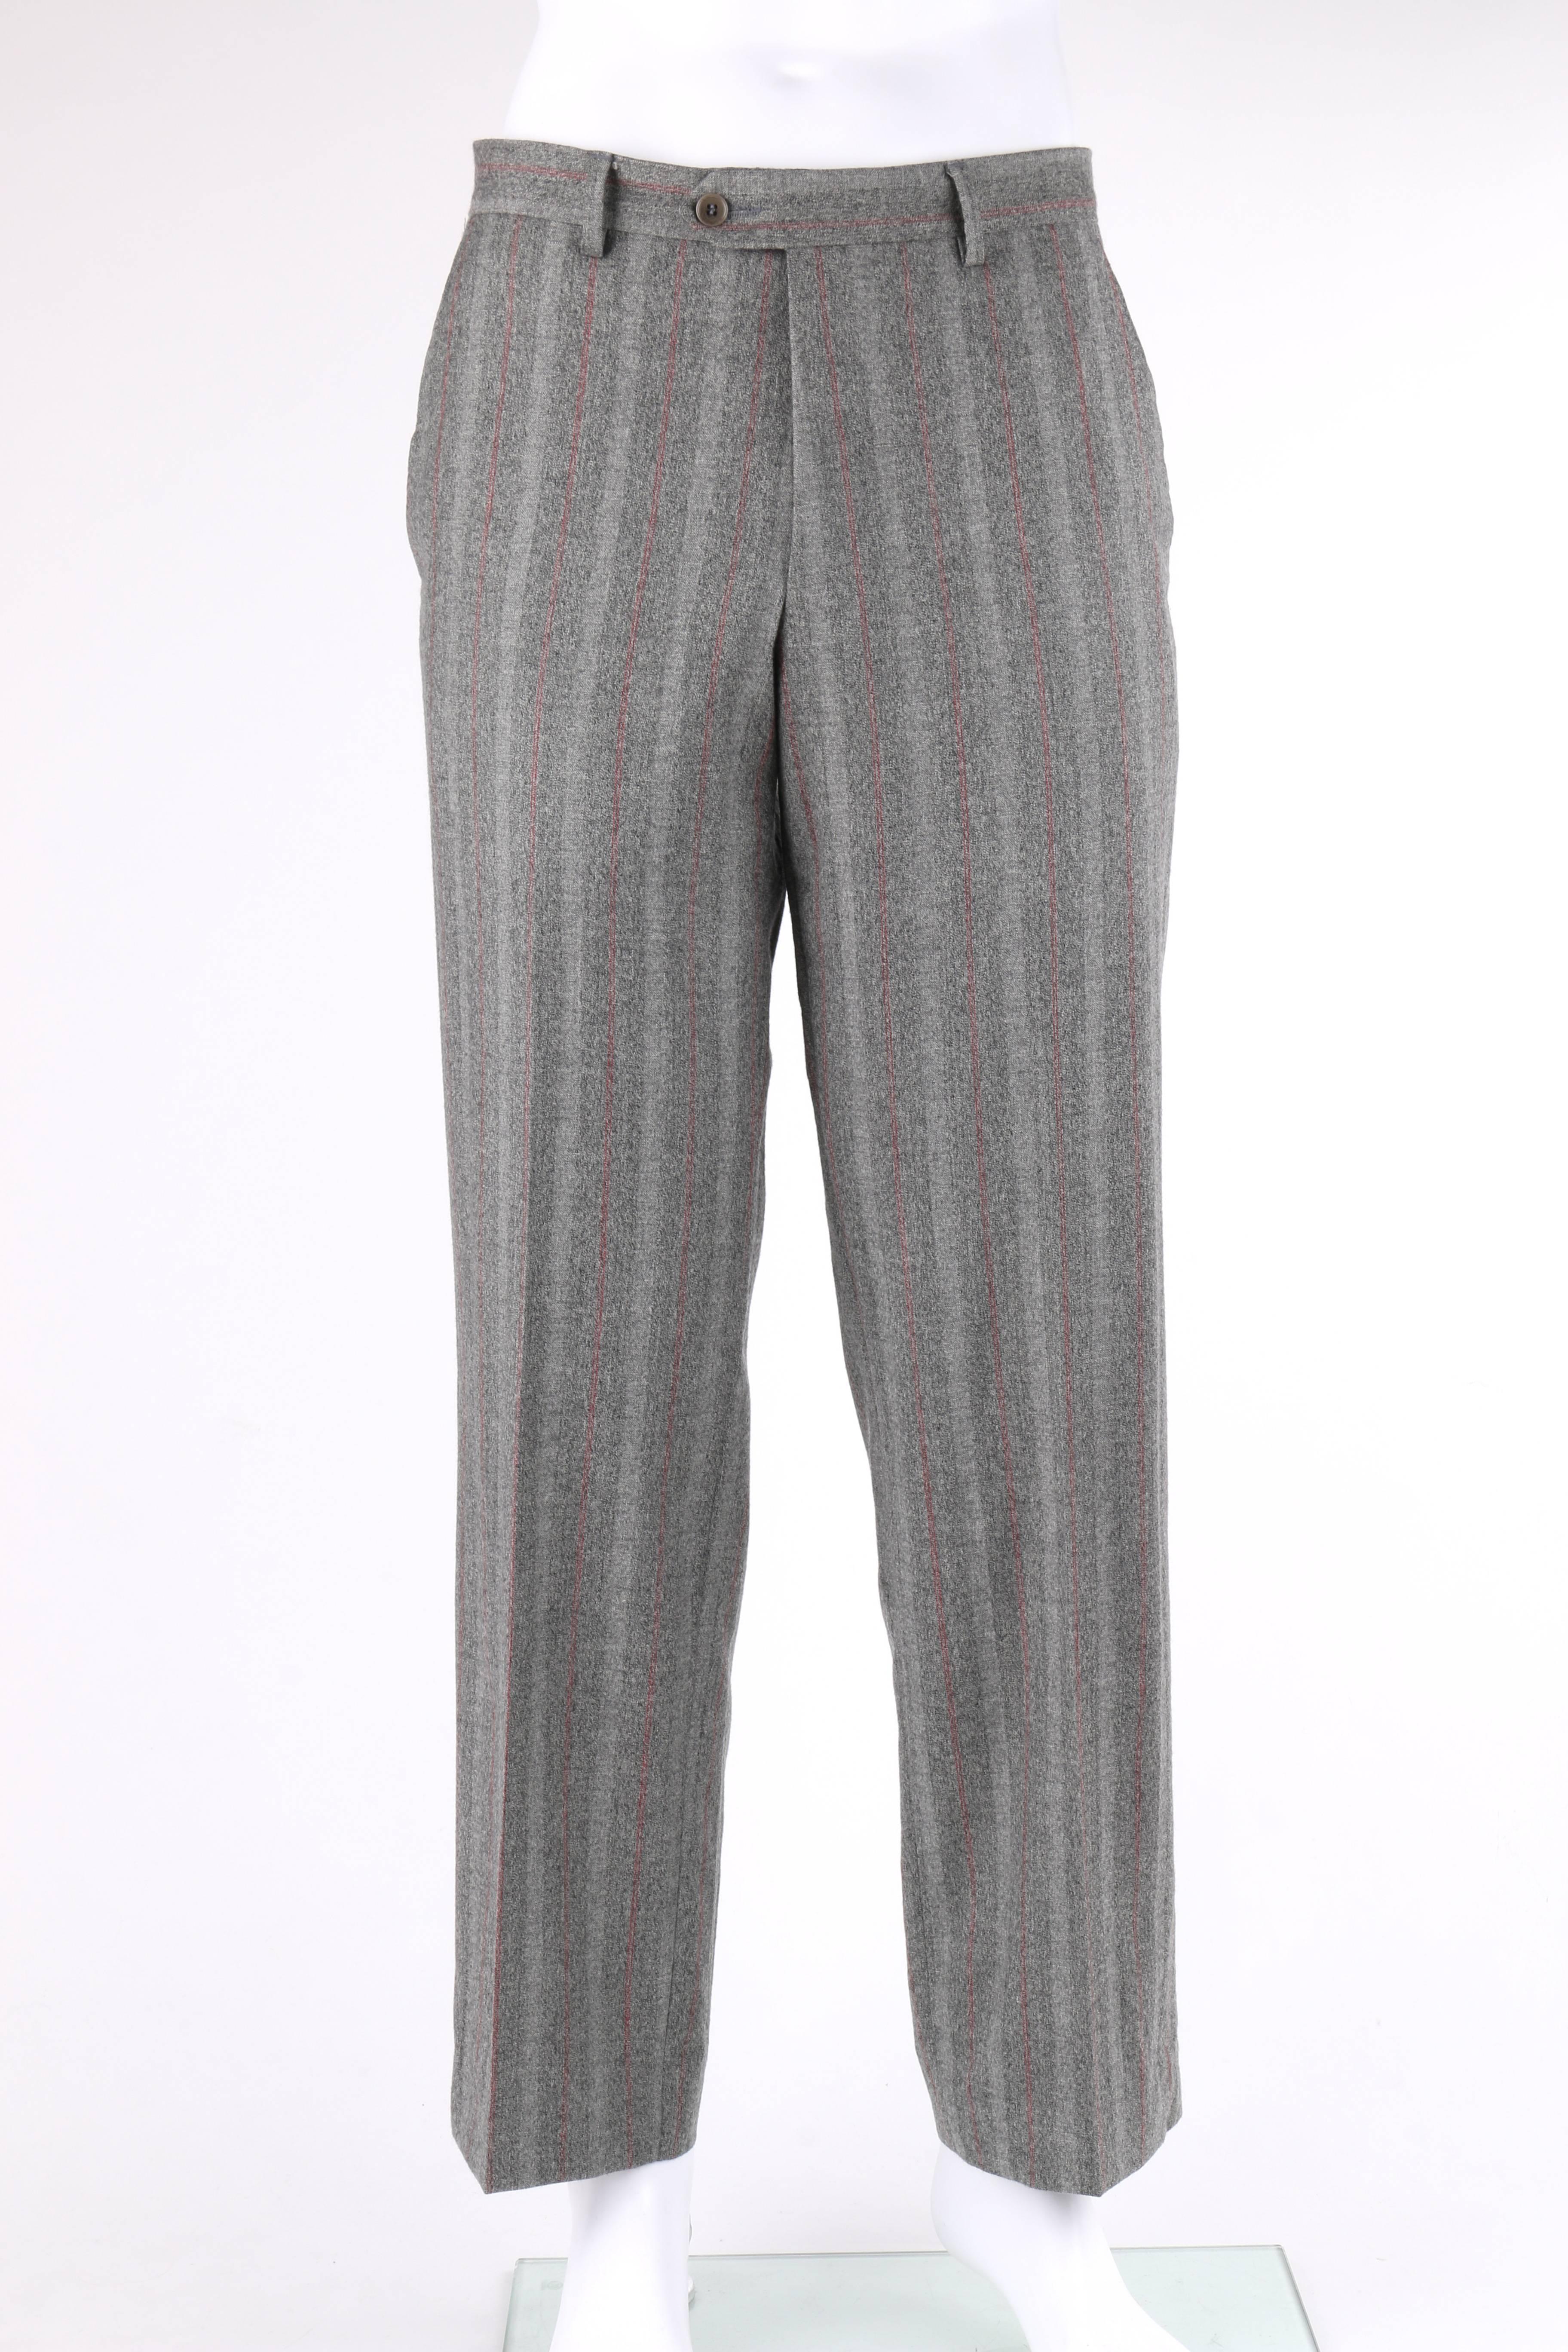 ALEXANDER McQUEEN c.2001 2 Pc Gray & Red Pinstripe Wool Jacket Pant Suit Set In Good Condition For Sale In Thiensville, WI